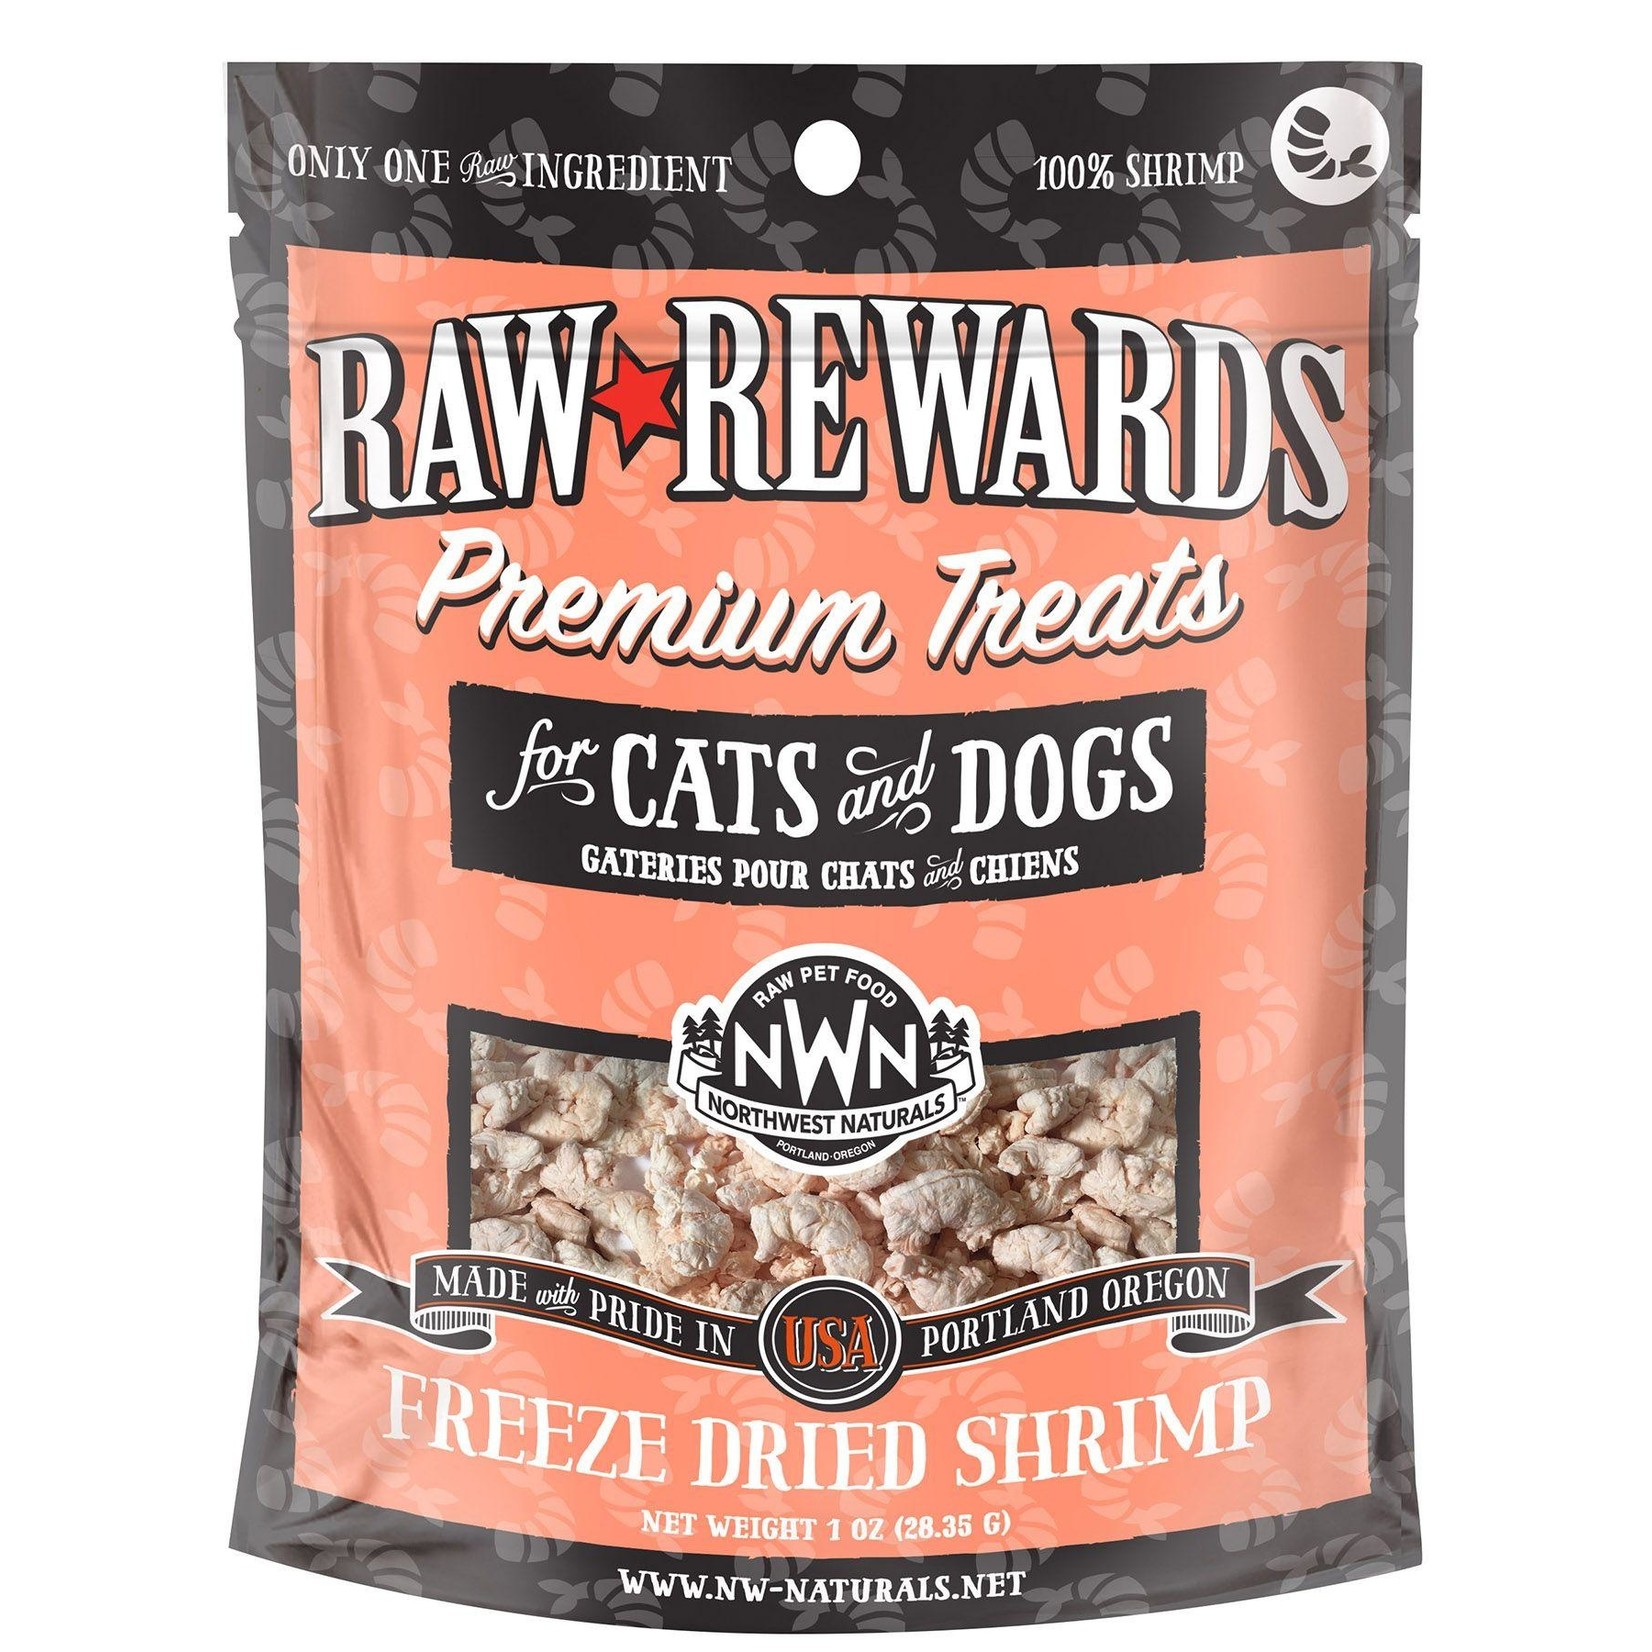 Northwest Naturals Raw Rewards Treats Freeze Dried Shrimp for Dogs & Cats